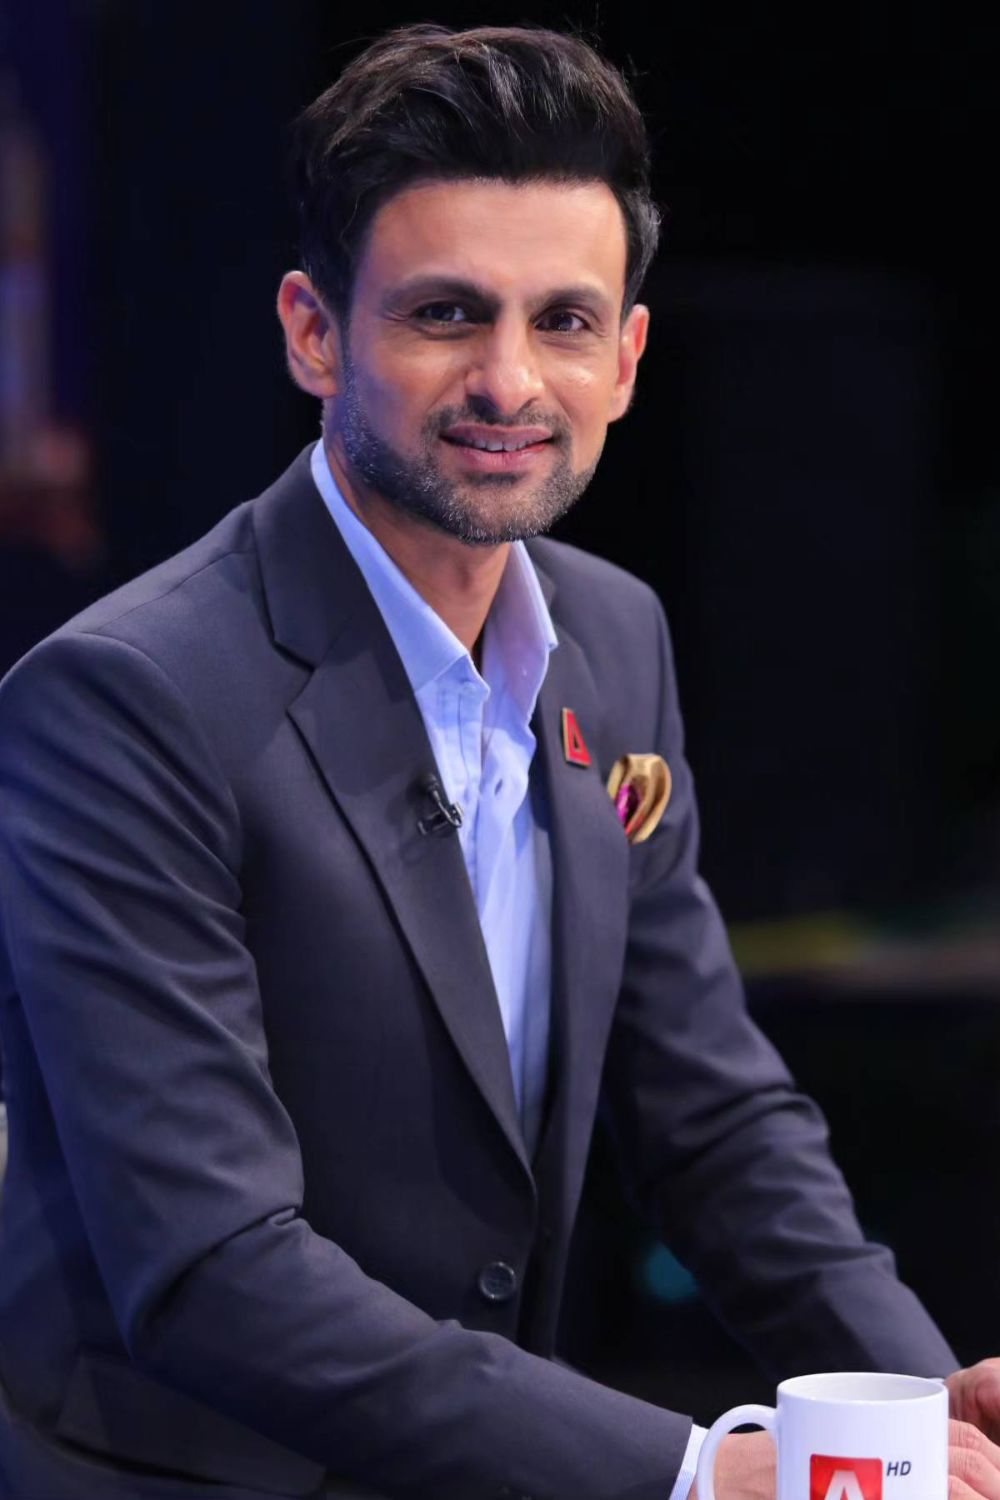 Shoaib Malik Was The Captain Of The Pakistan National Cricket Team From 2007 To 2009